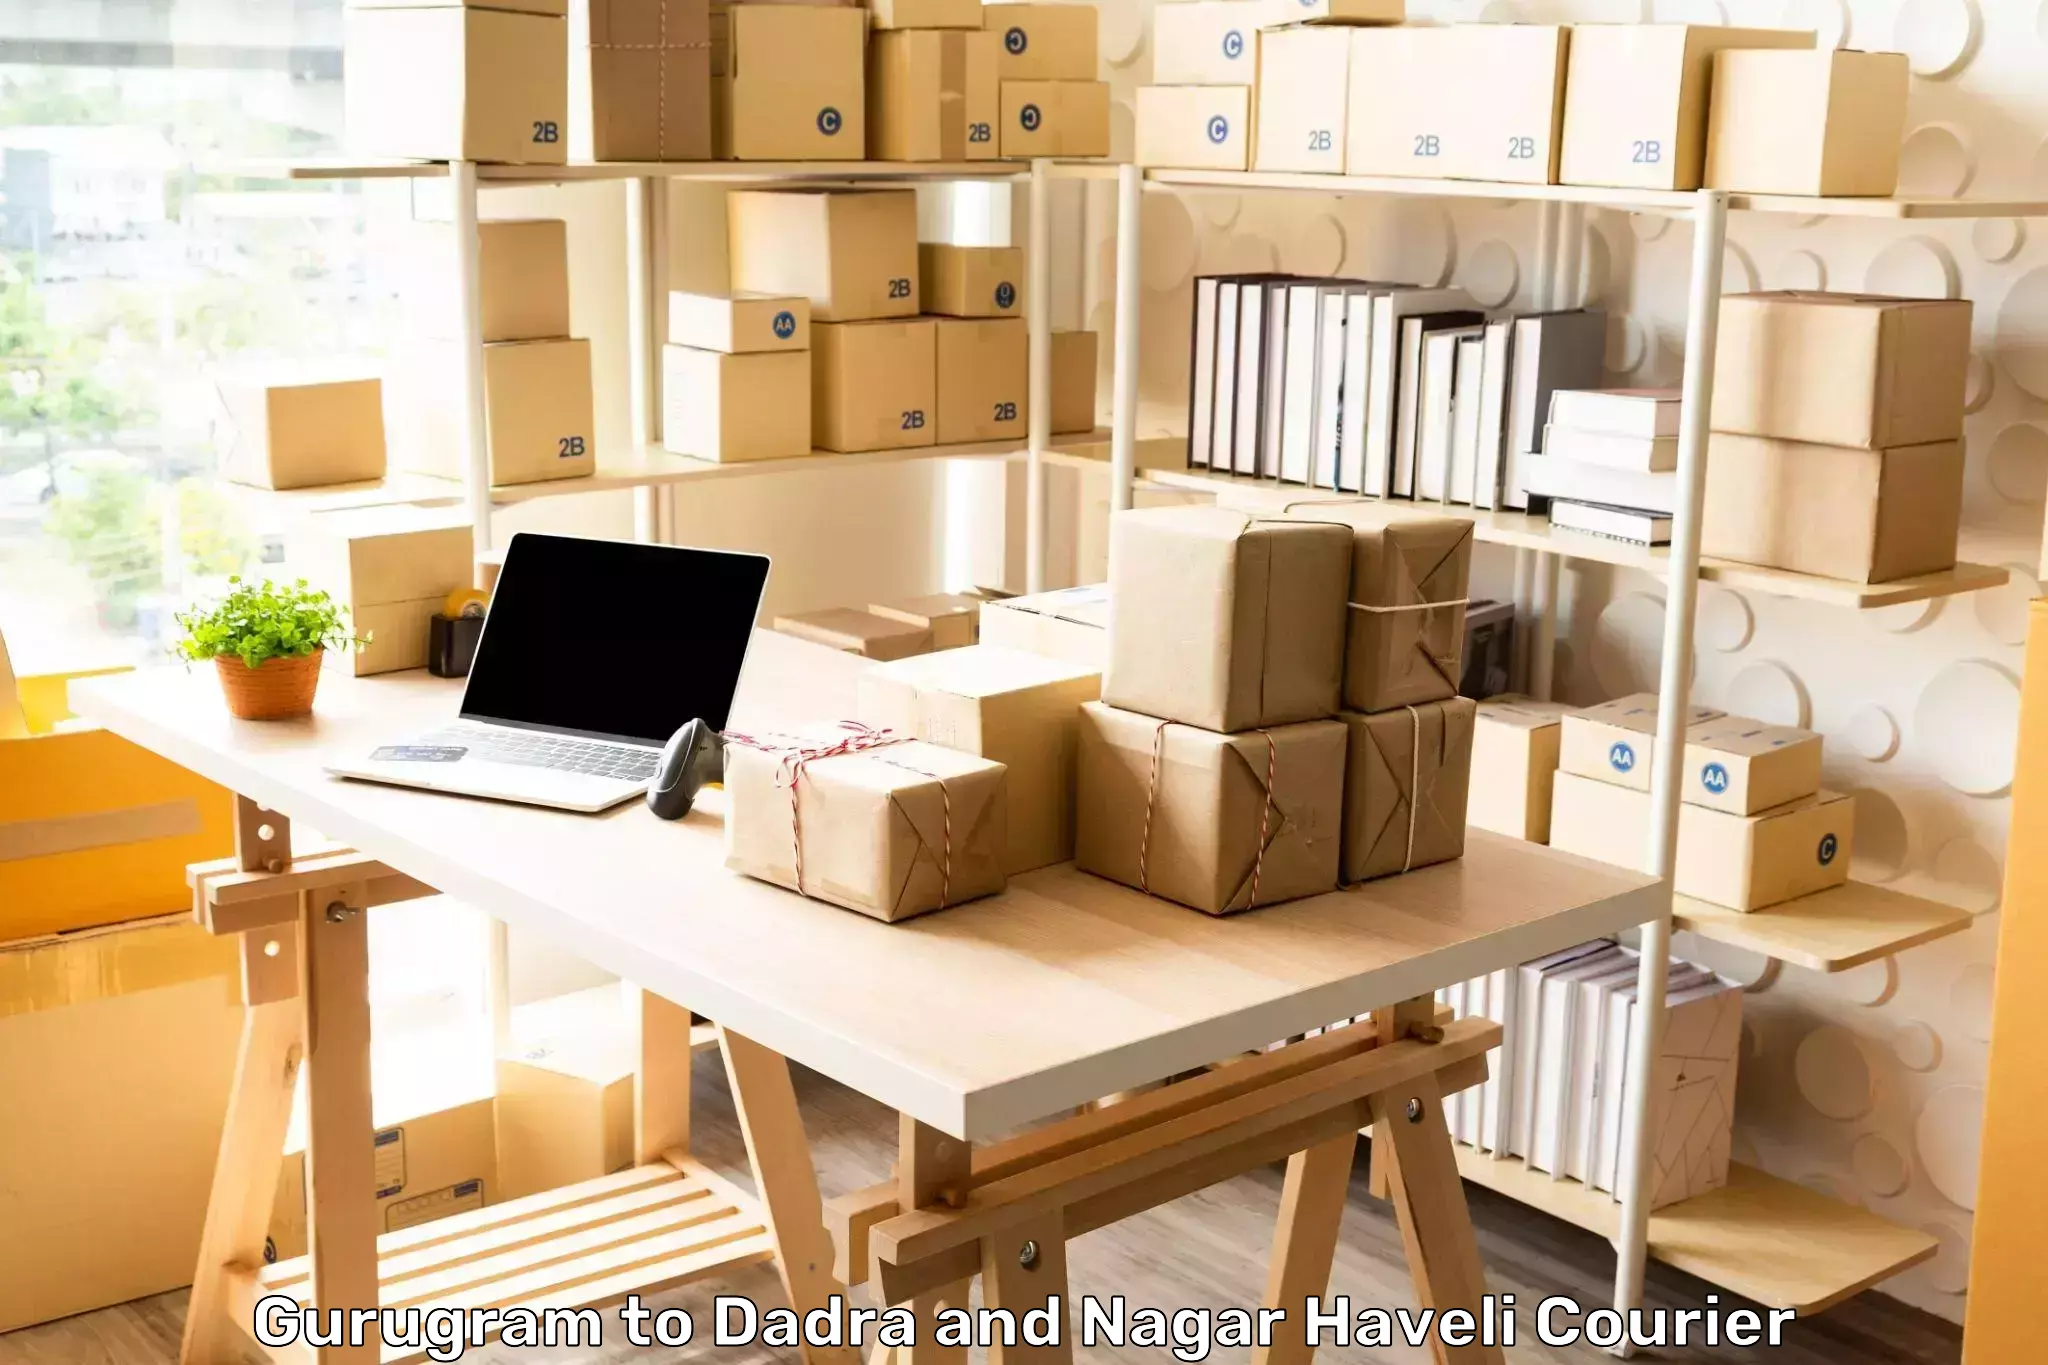 Large package courier Gurugram to Dadra and Nagar Haveli